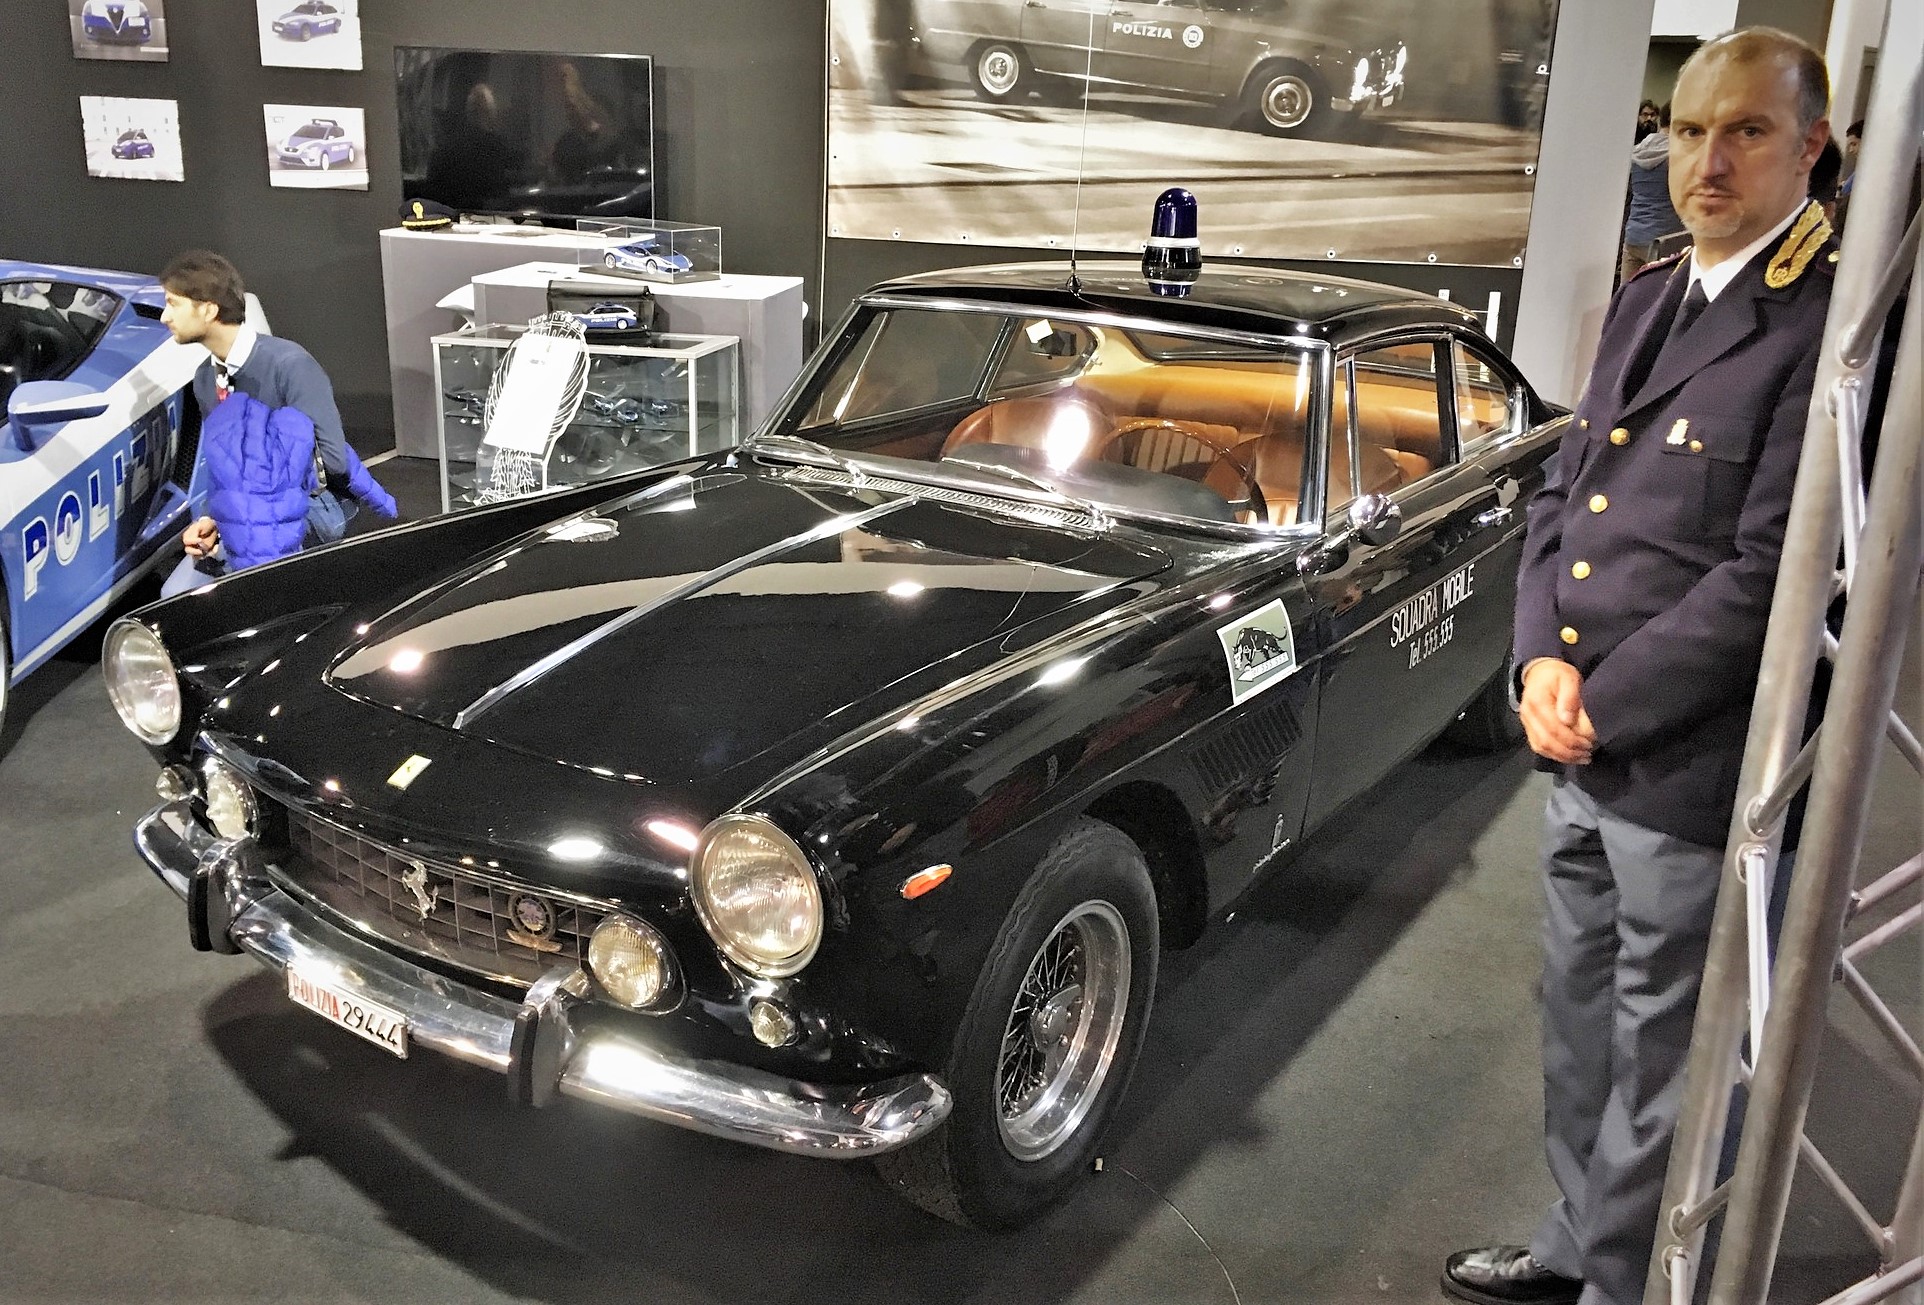 , Fairest of the Fiera: The best of Padova, ClassicCars.com Journal